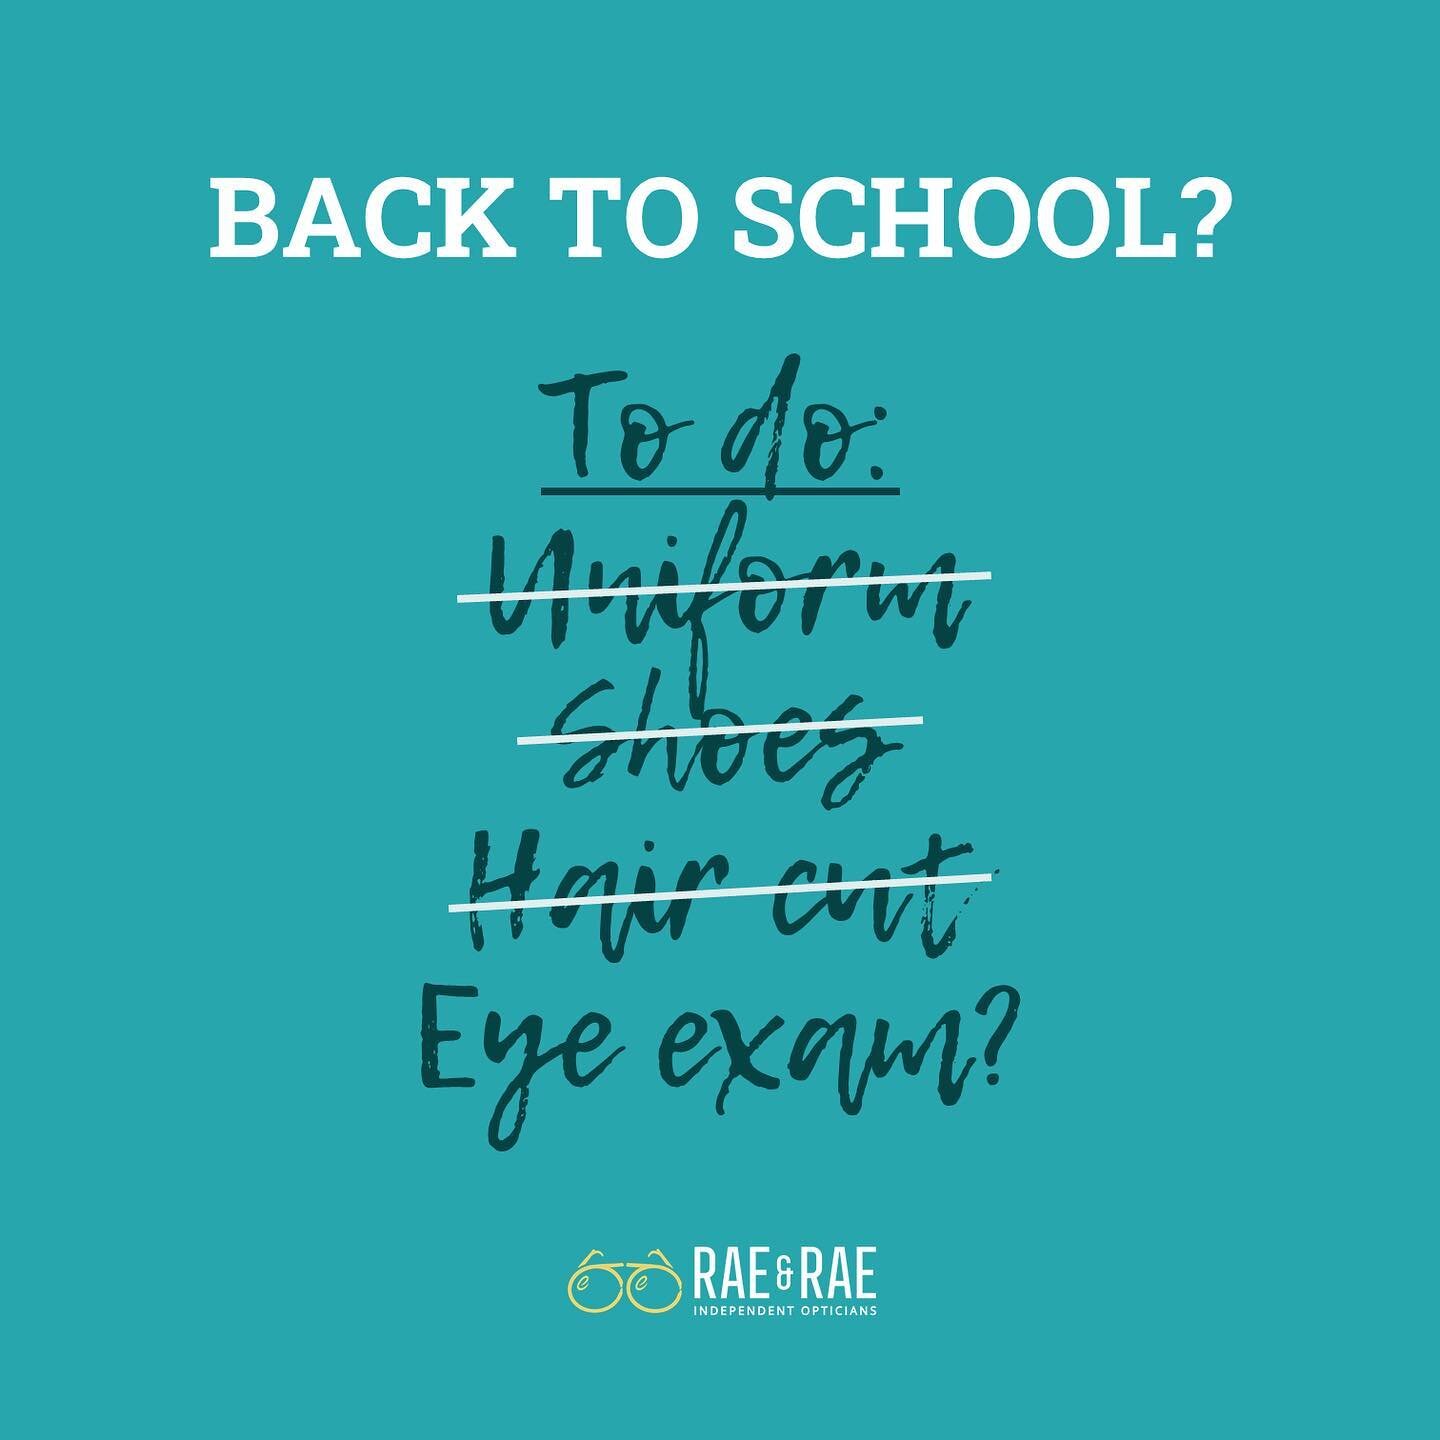 Remember to add an eye exam to your back to school checklist!

👓🕶
⁠
#independentopticians #york #bishyroad #independentoptometrist #indieyork #yorkindependent #shoplocalyork #independentyork #yorkindependentlife #onlyinyork #visityork #loveyork #lo